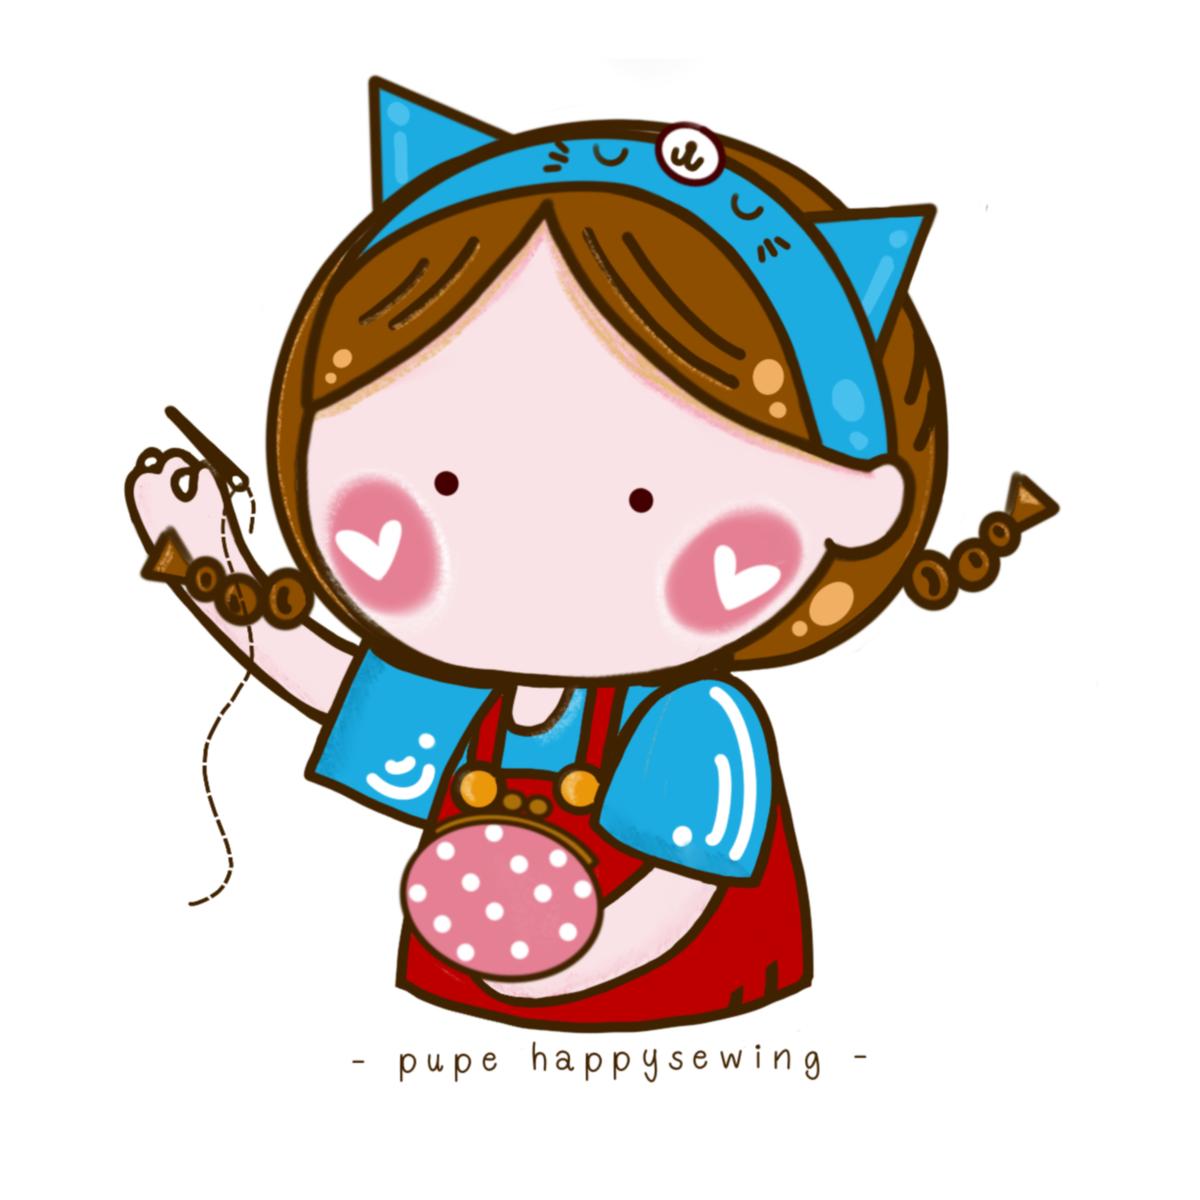 pupehappysewing